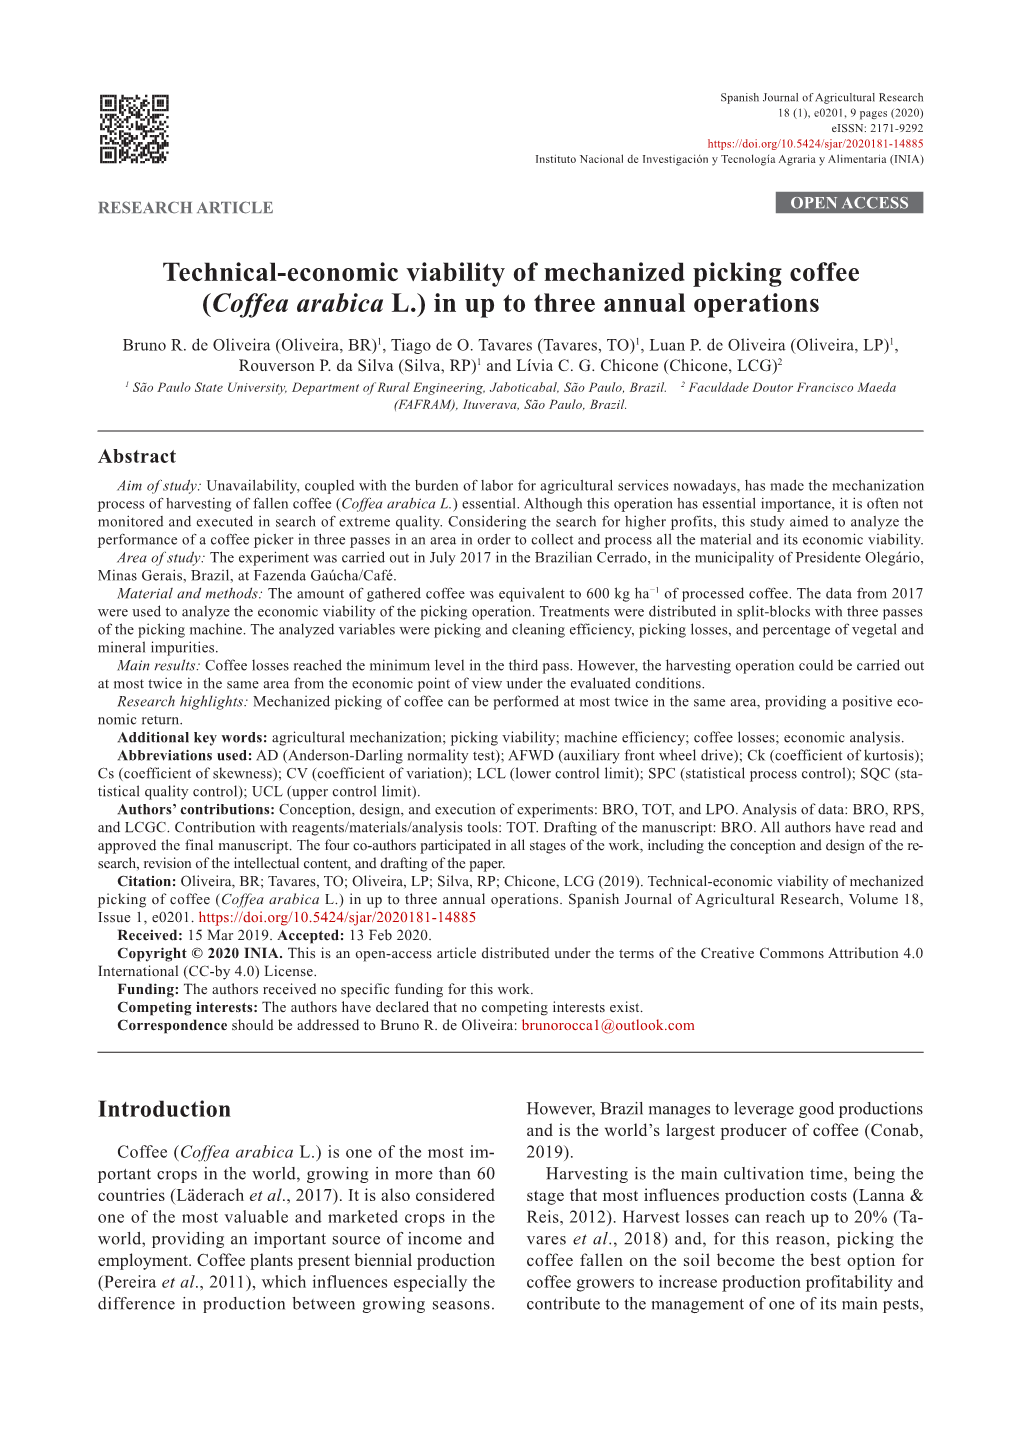 Technical-Economic Viability of Mechanized Picking Coffee (Coffea Arabica L.) in up to Three Annual Operations